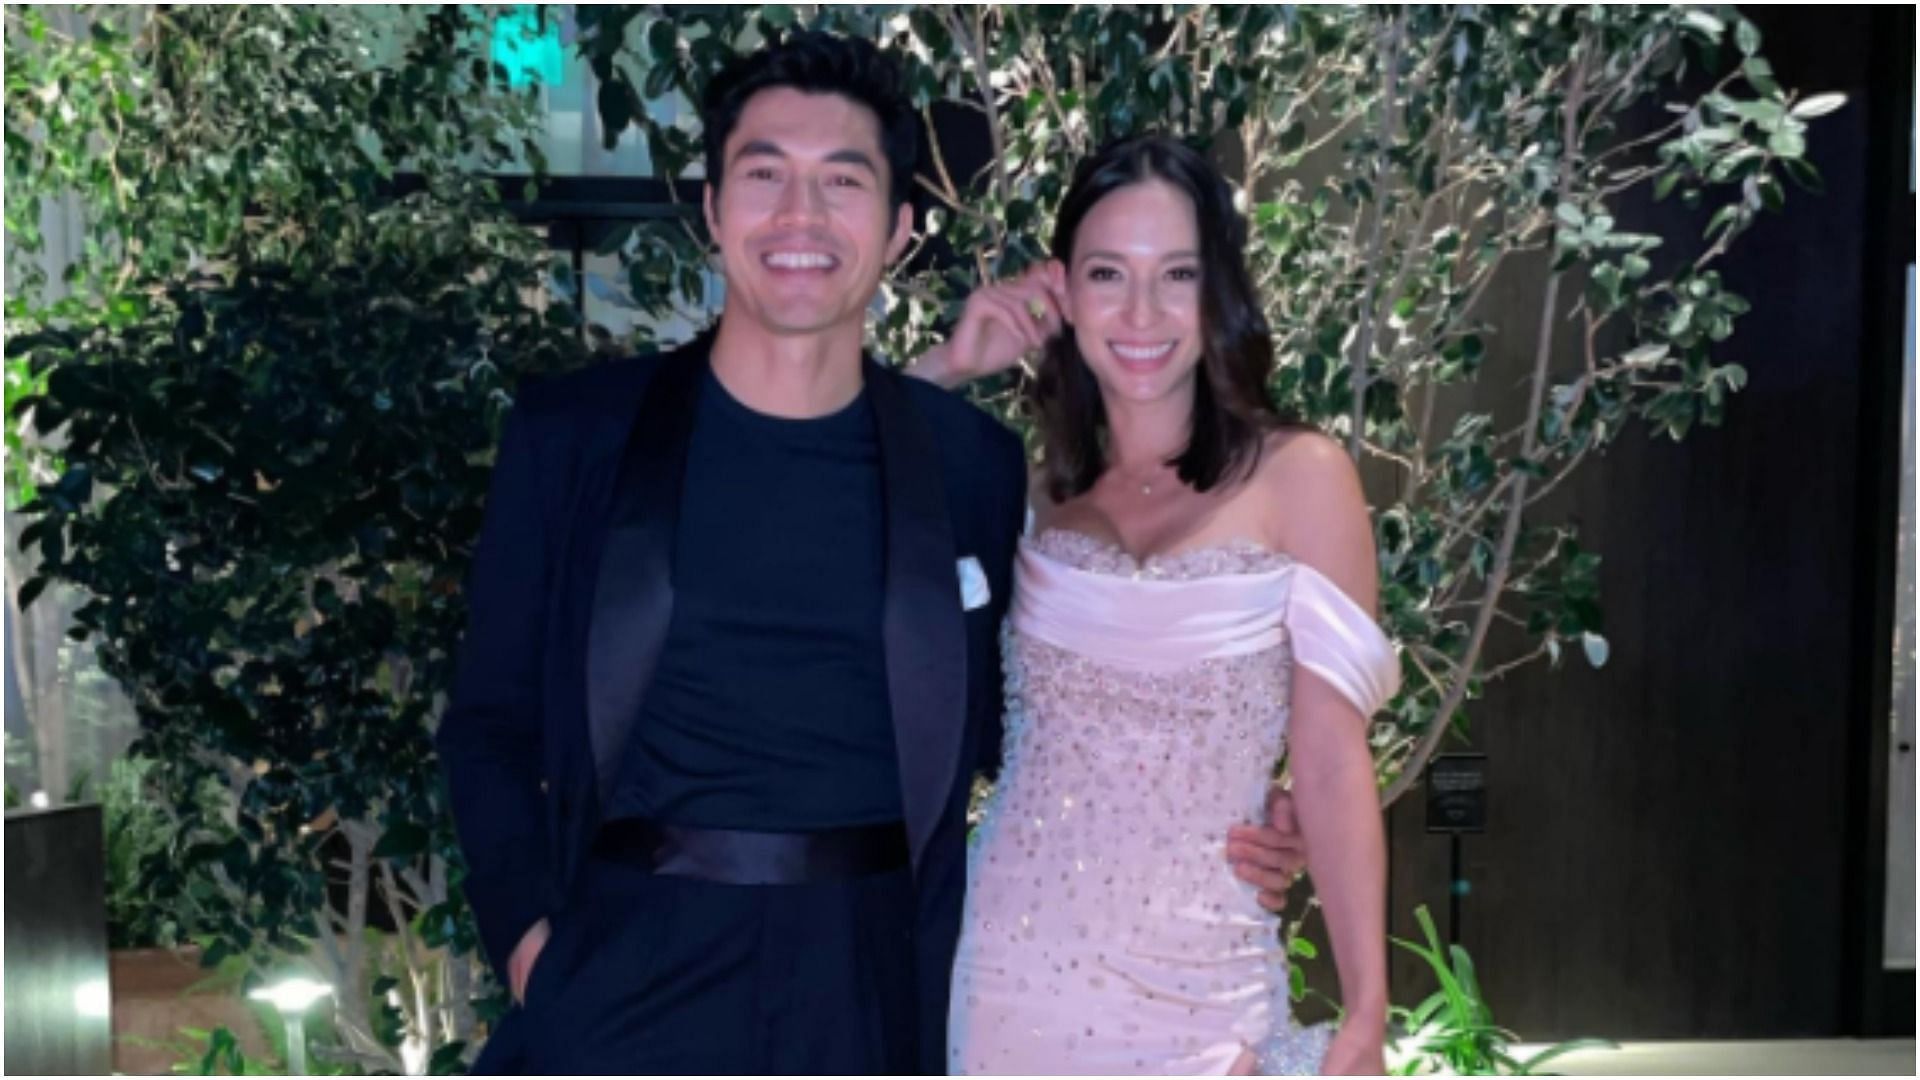 Henry Golding and Liv Lo&#039;s daughter had a play date with Olivia Munn and John Mulaney&#039;s son (Image via Instagram/ henrygolding)